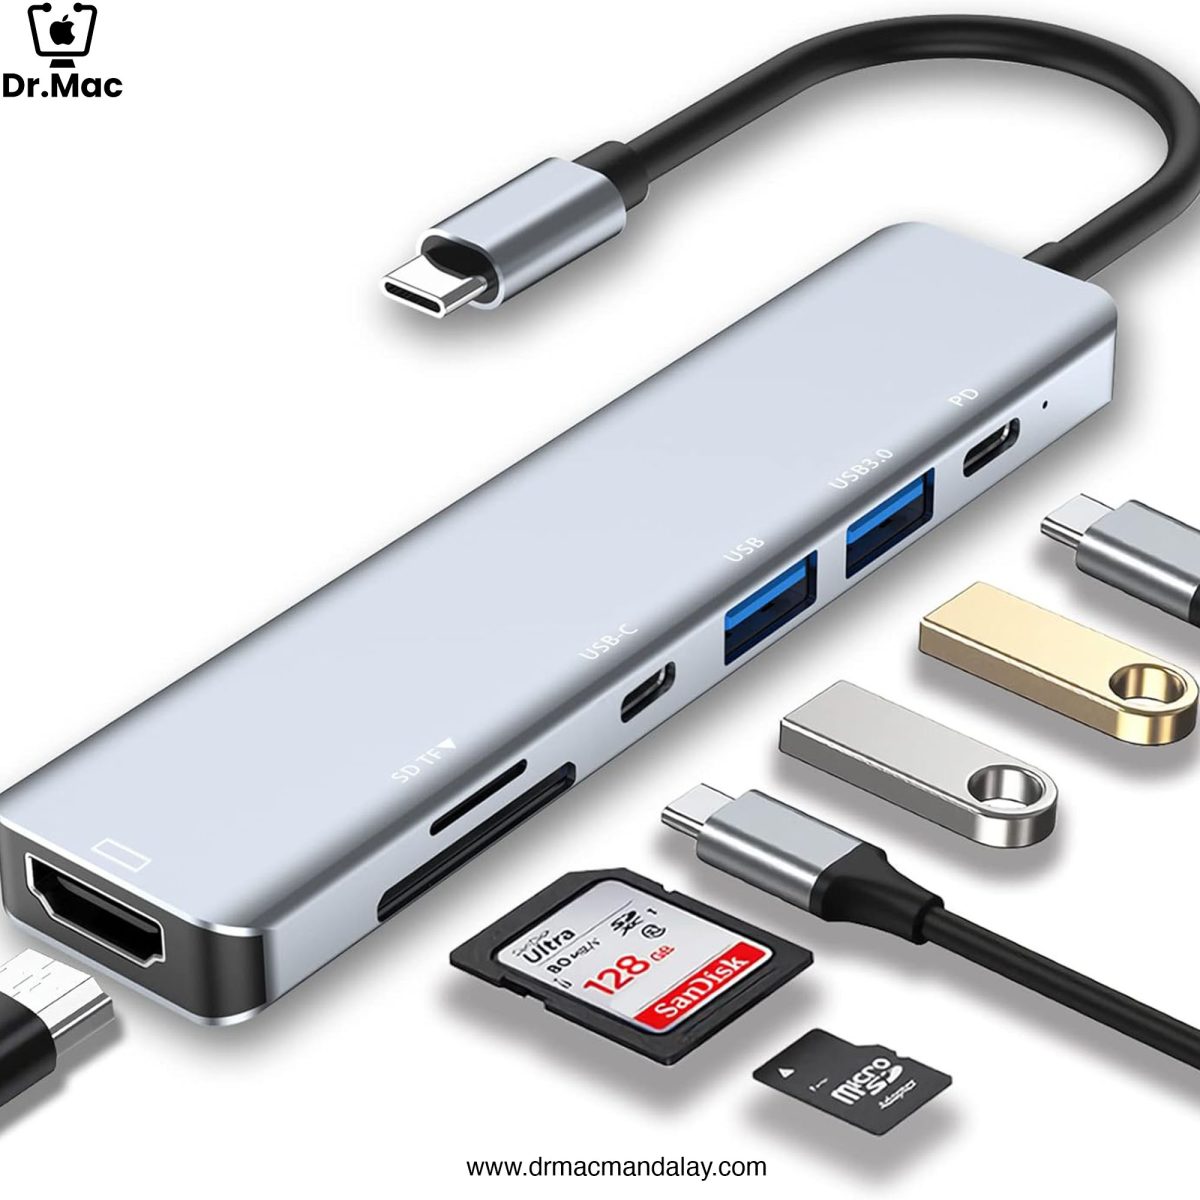 7 in 1 usb type c hub adapter with 4k hdmi, usb 3.0